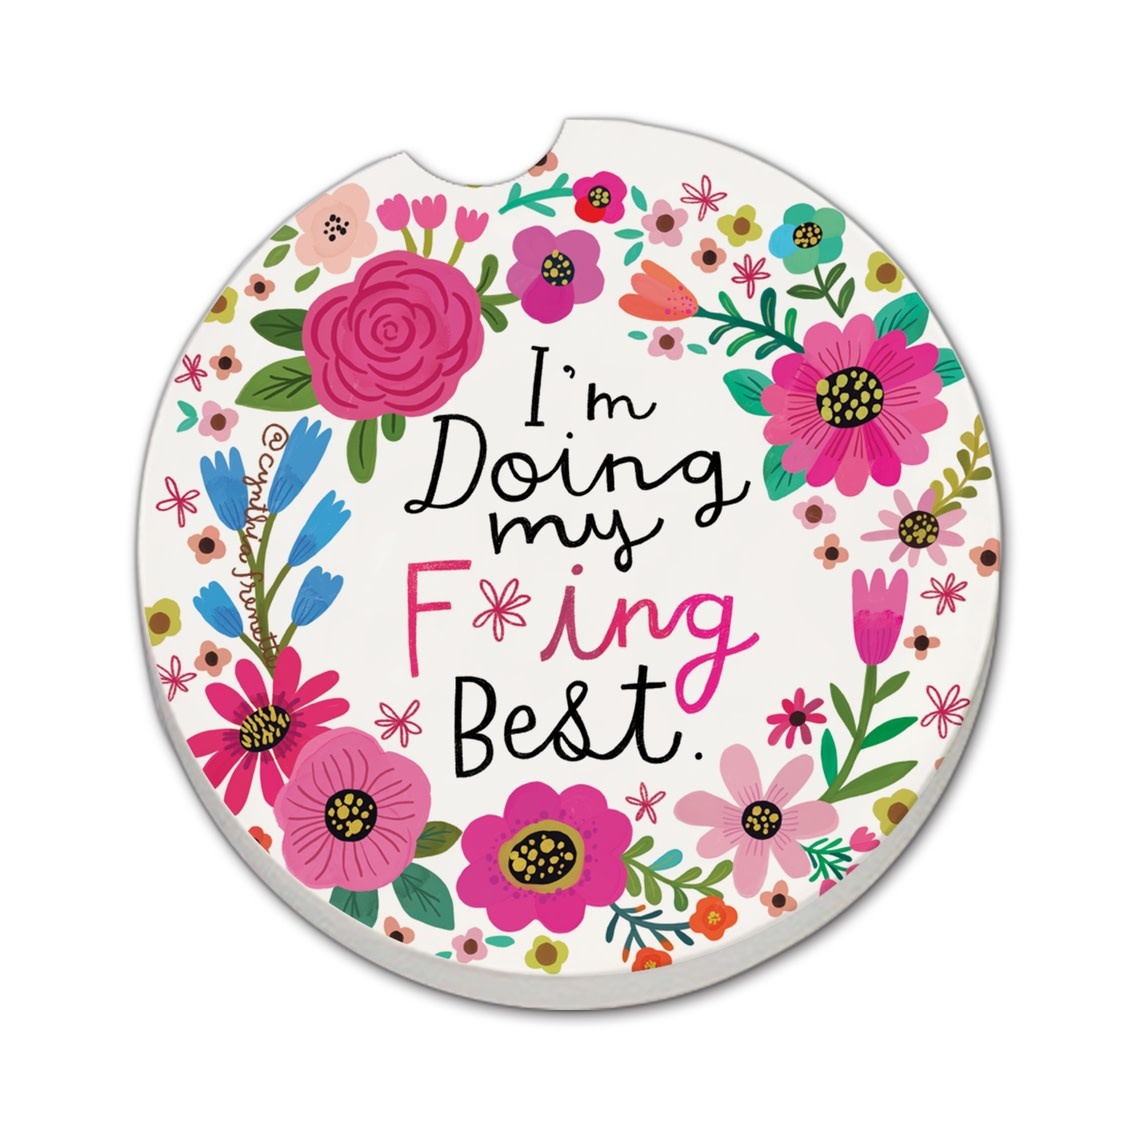 CounterArt and Highland Home "Doing My Best" Stone Car Coaster